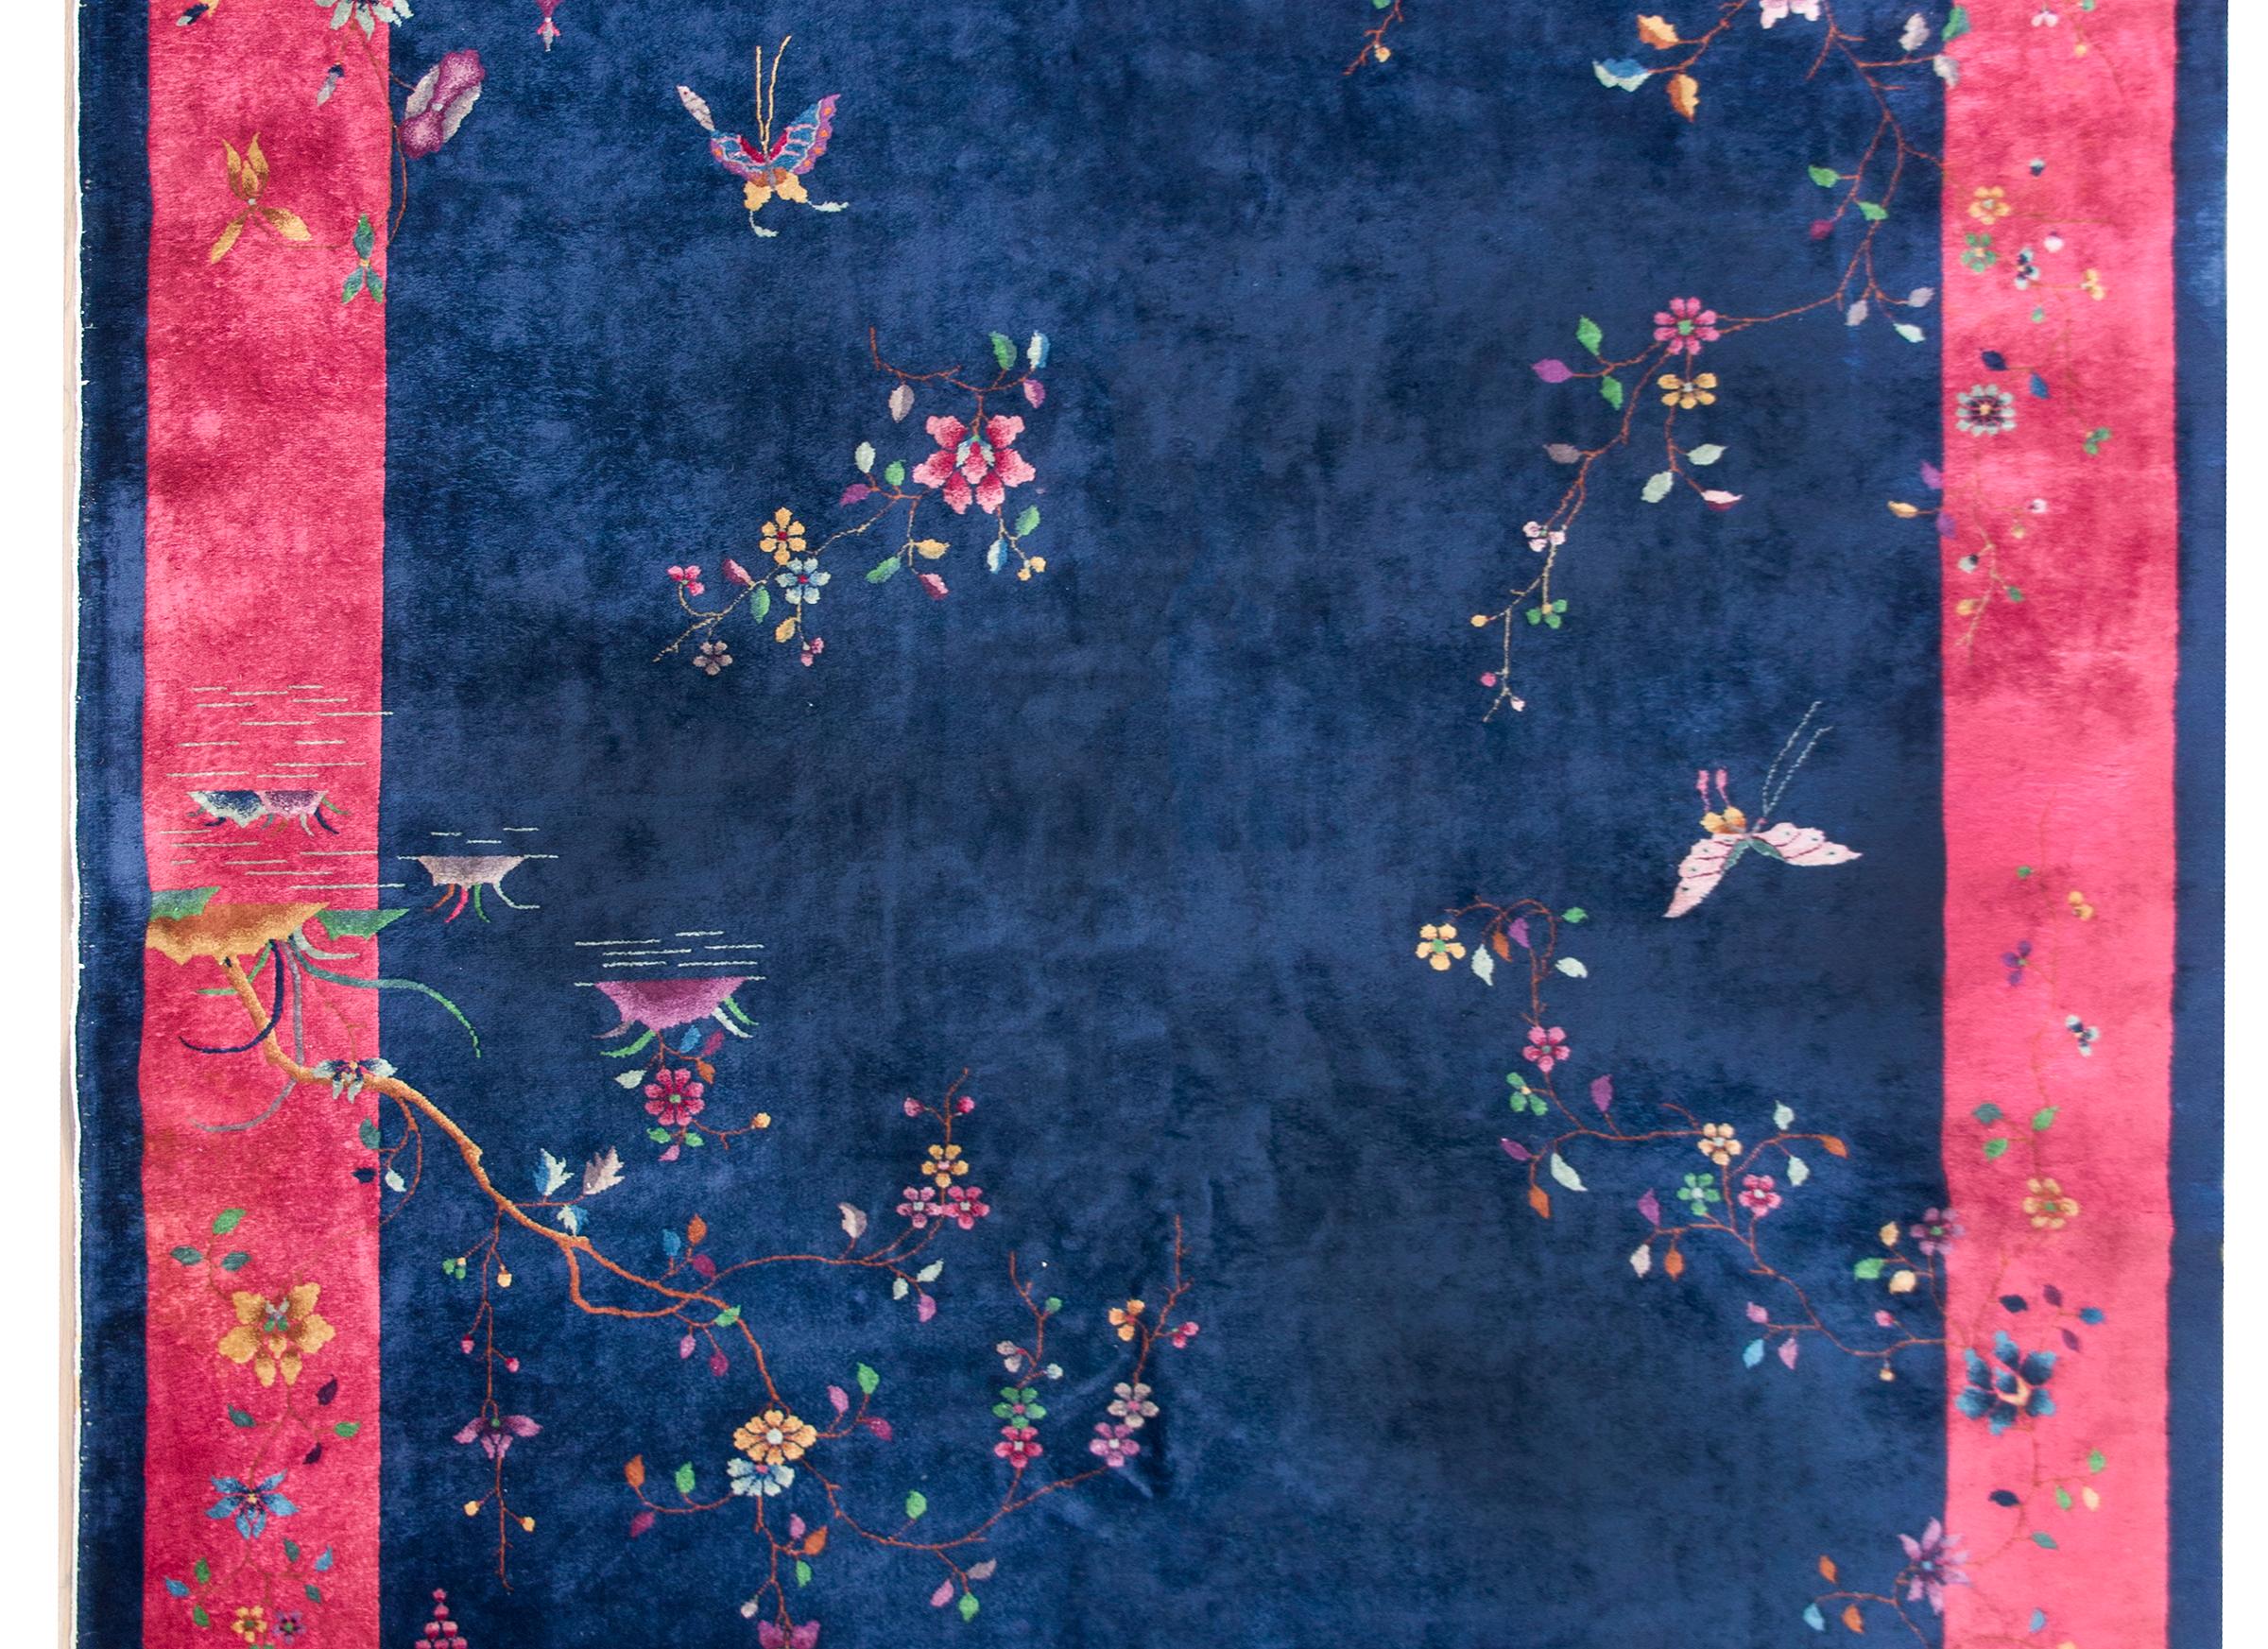 A beautiful early 20th century Chinese Art Deco rug with a dark indigo background surrounded by a wide fuchsia border, and overlaid with wispy prunus blossoms and peonies, butterflies, and a garden pagoda in the lower right corner.